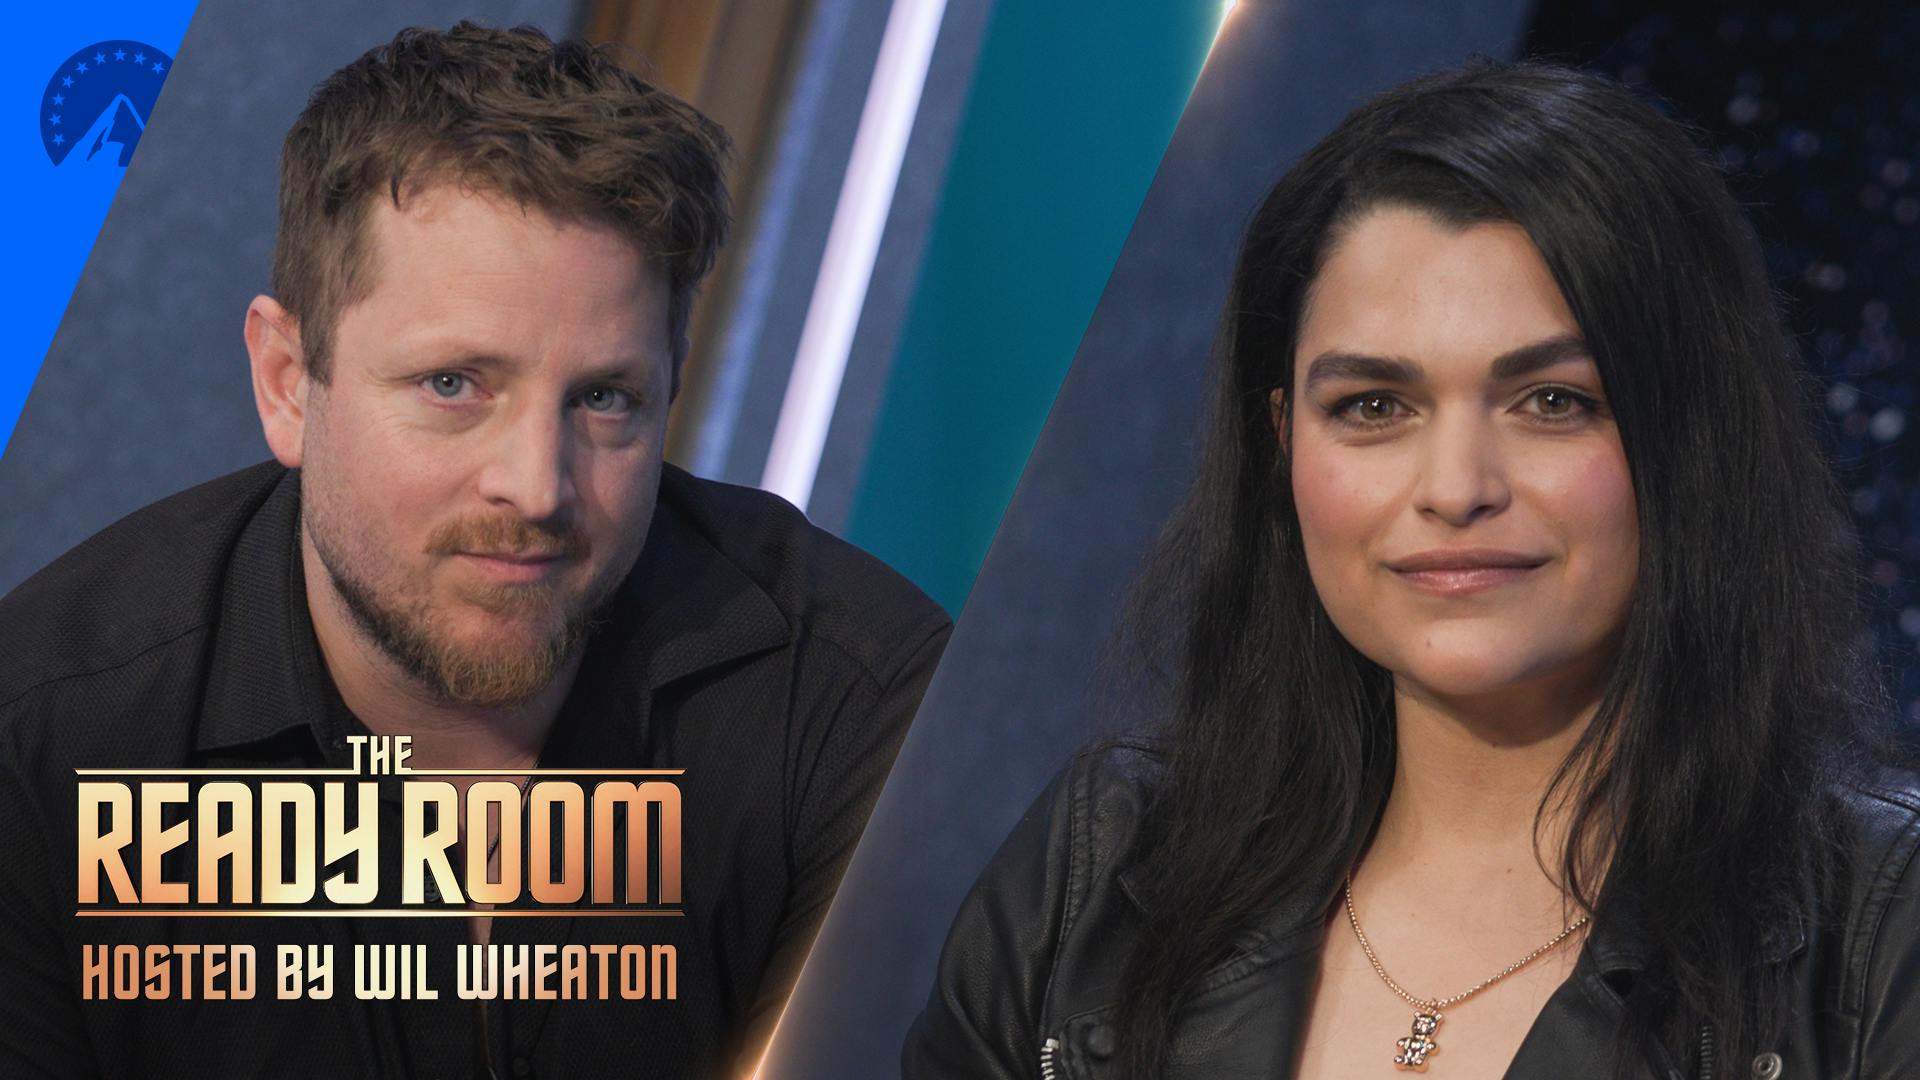 Elias Toufexis and Eve Harlow head to The Ready Room